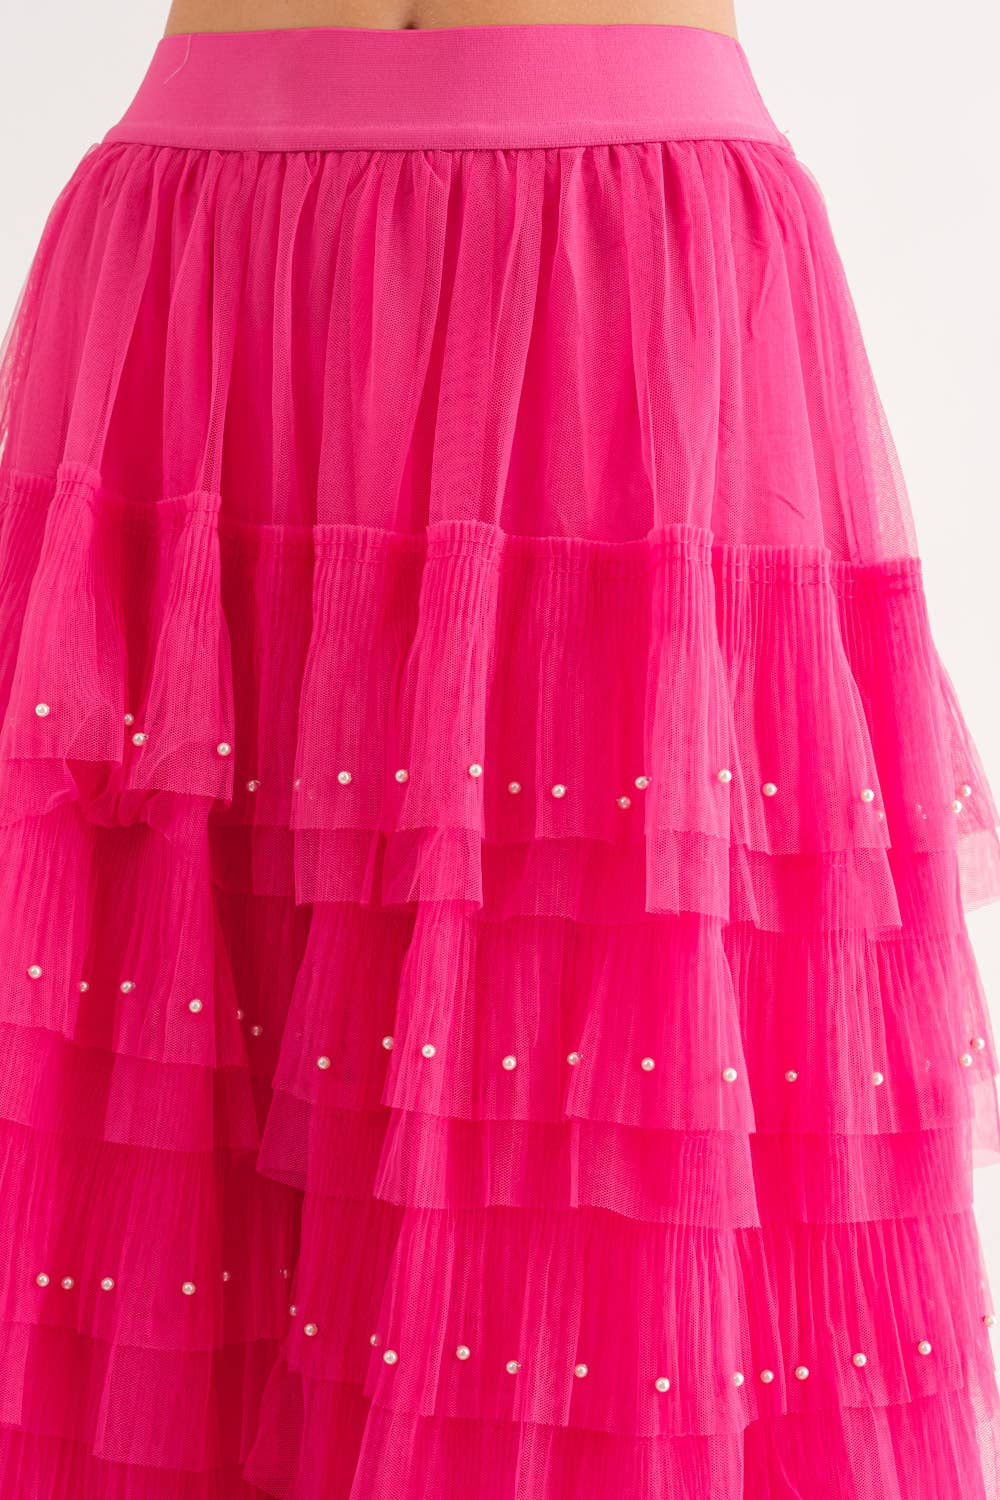 Hot Pink Pearl Embellished Maxi Tulle Skirt